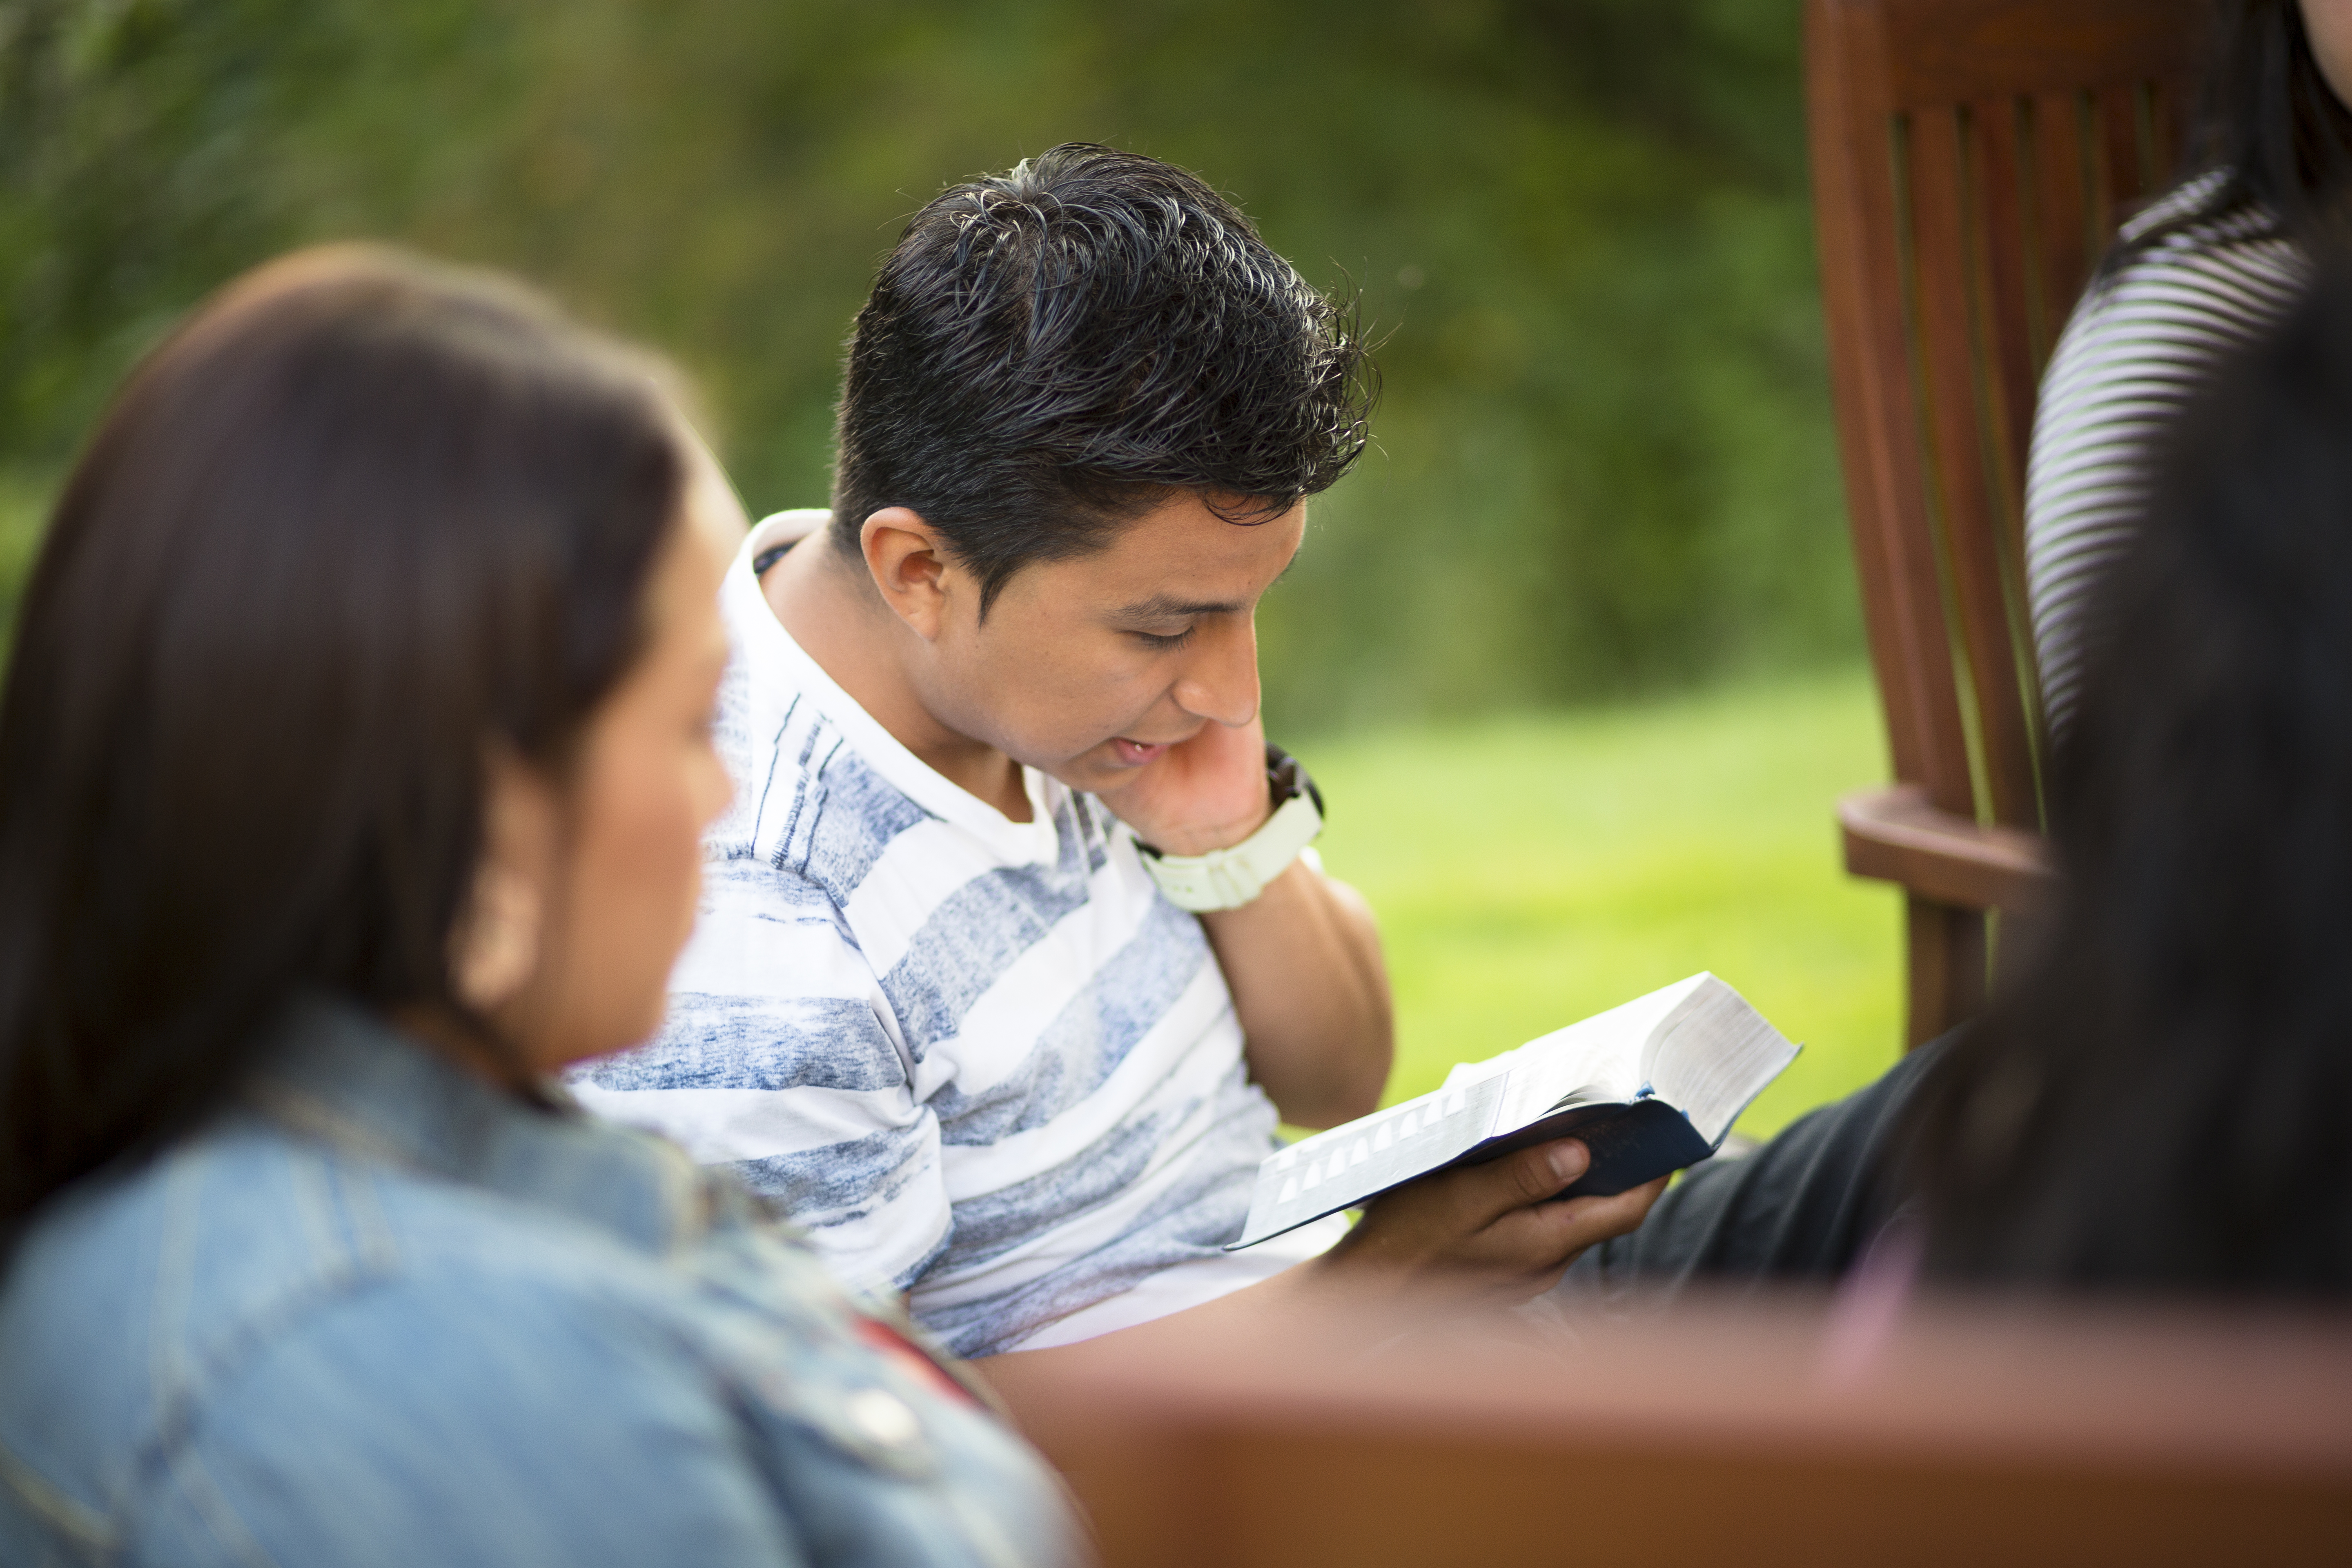 A young man reads from the scriptures while others sit around and listen.